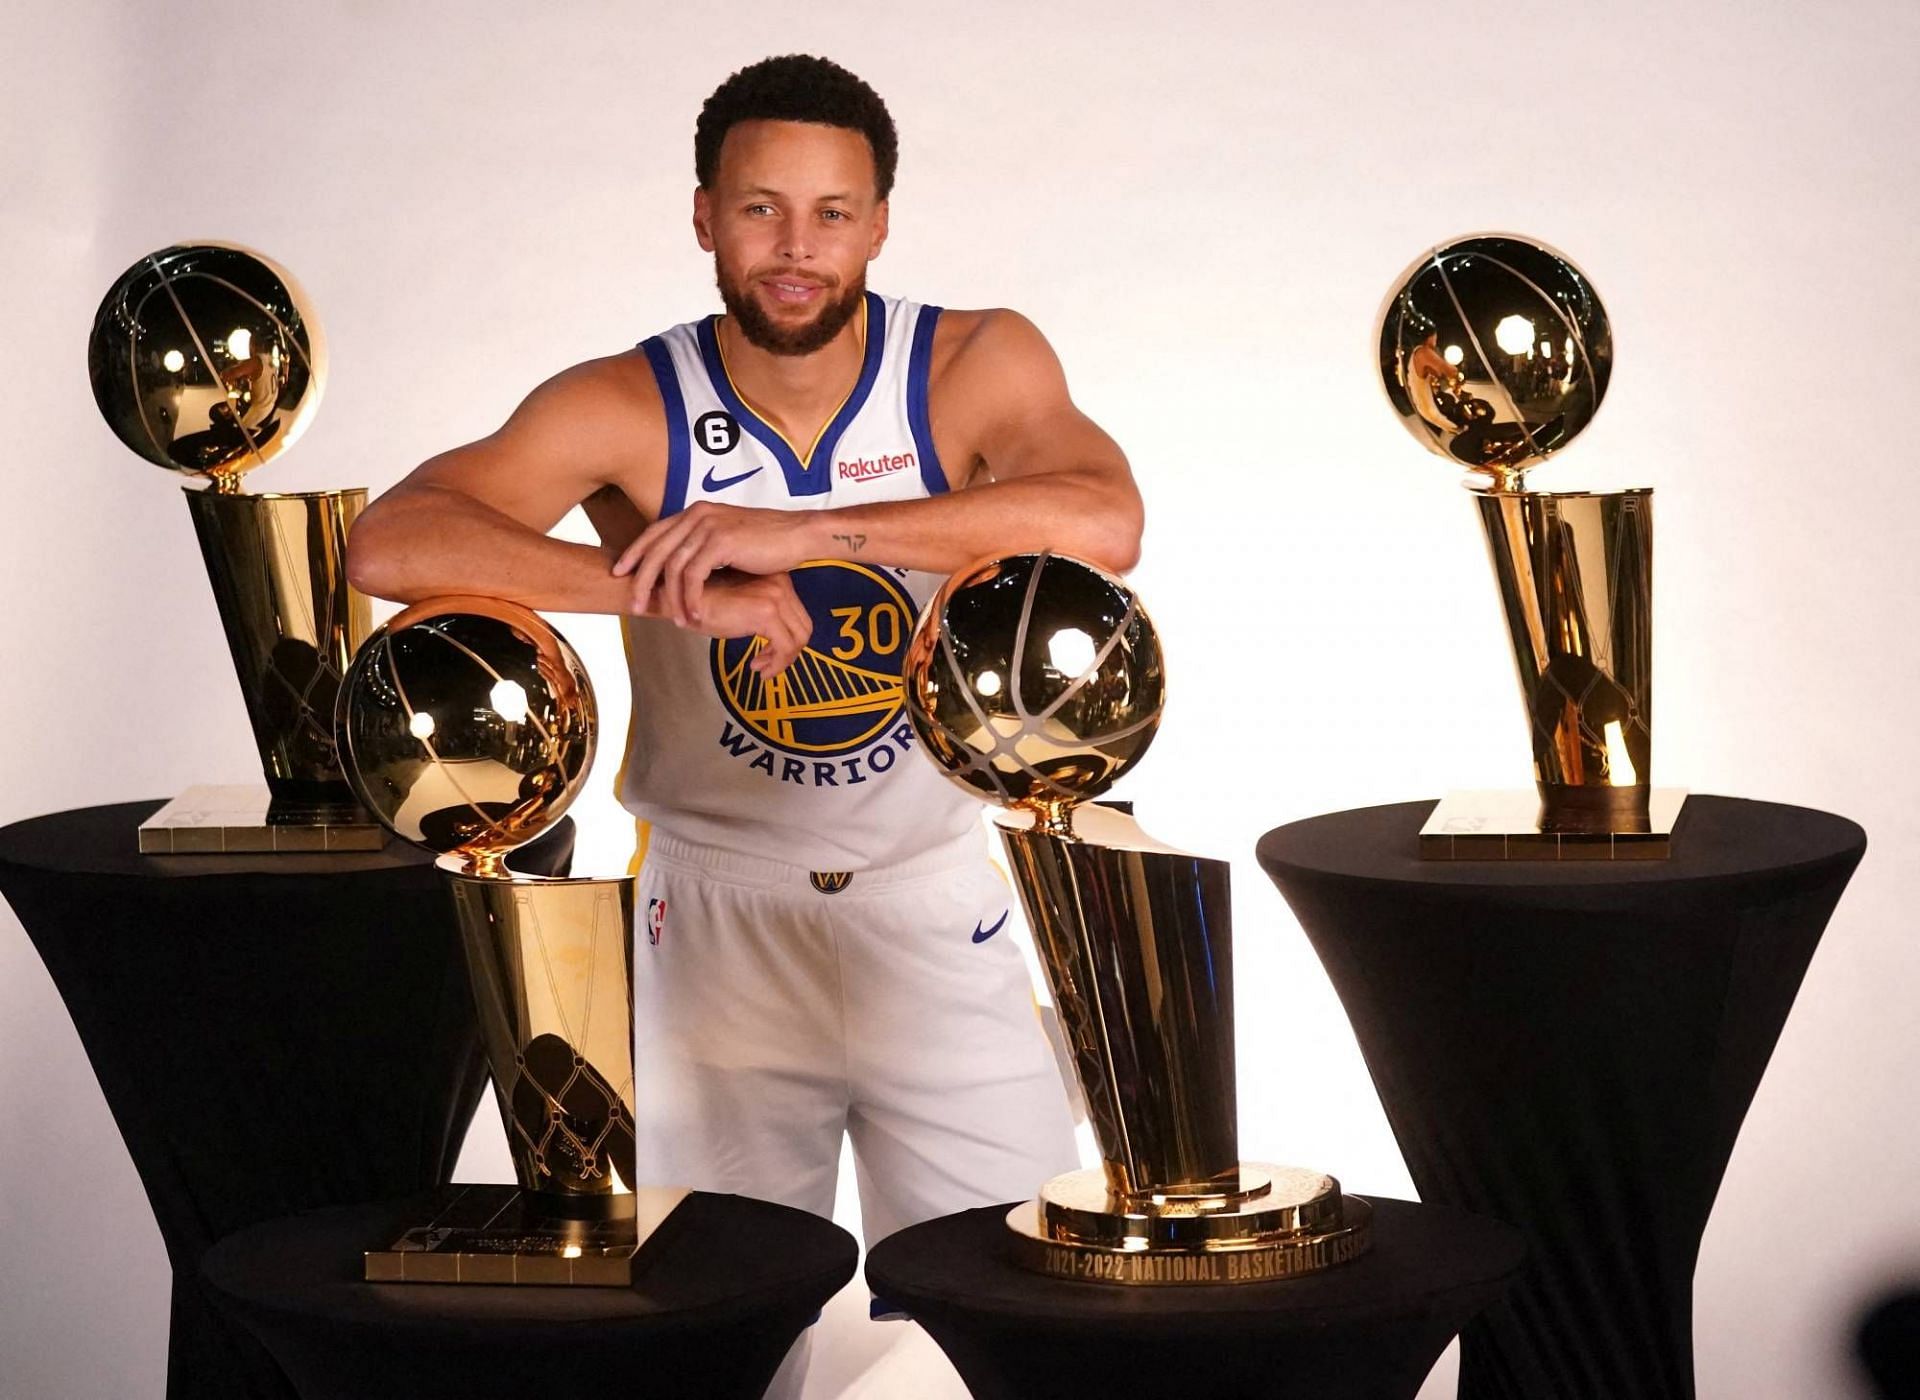 Stephen Curry after leading the Warriors to their 4th championship in 8 years in 2022